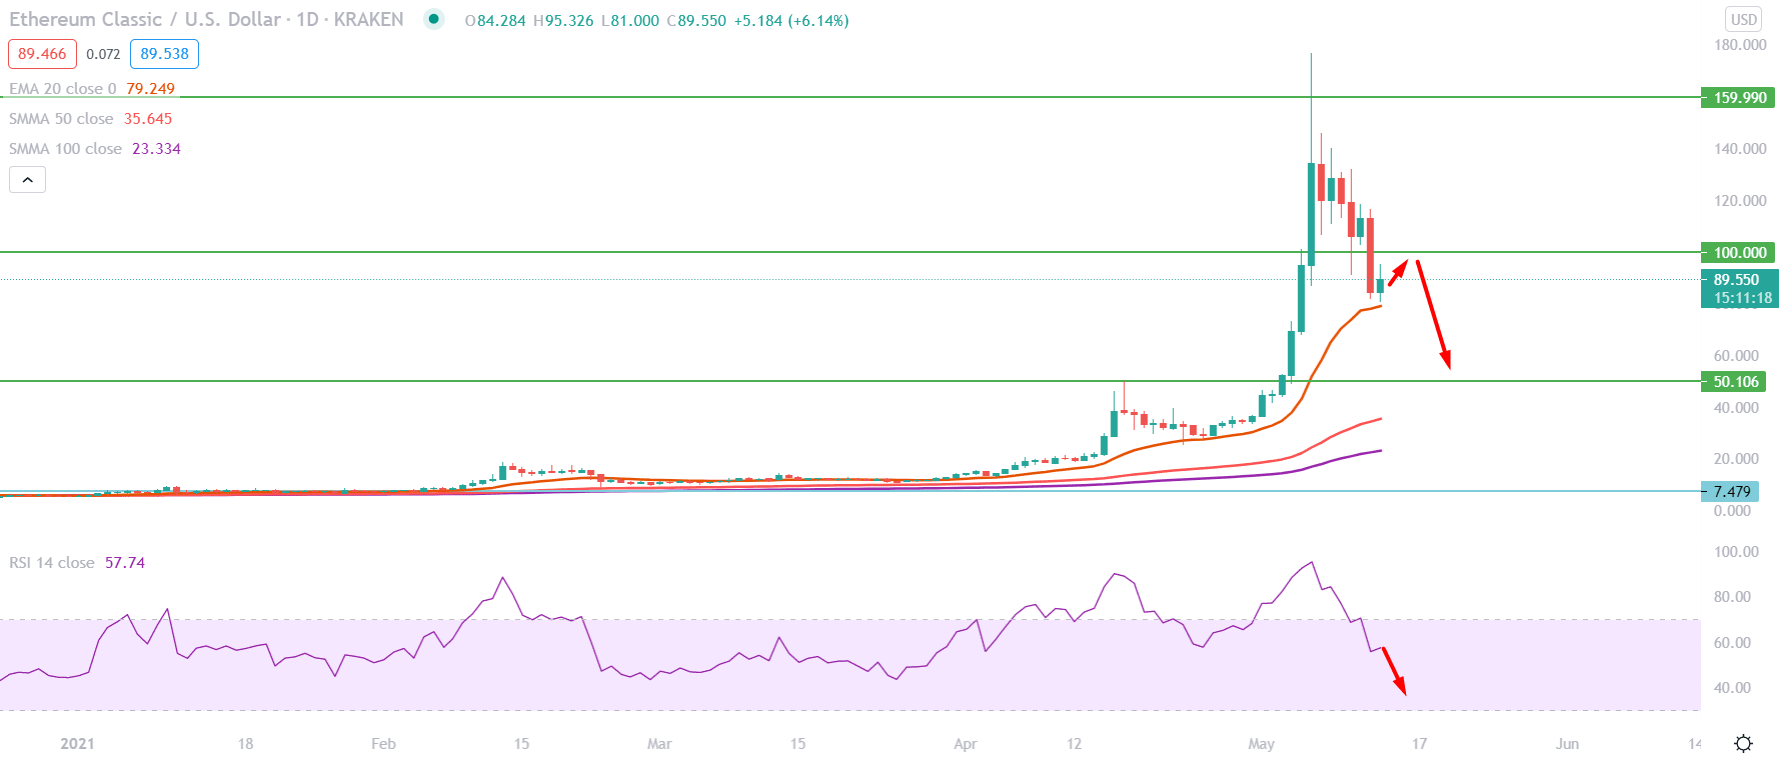 Ethereum Classic (ETC) Daily Technical Analysis 13 May 2021